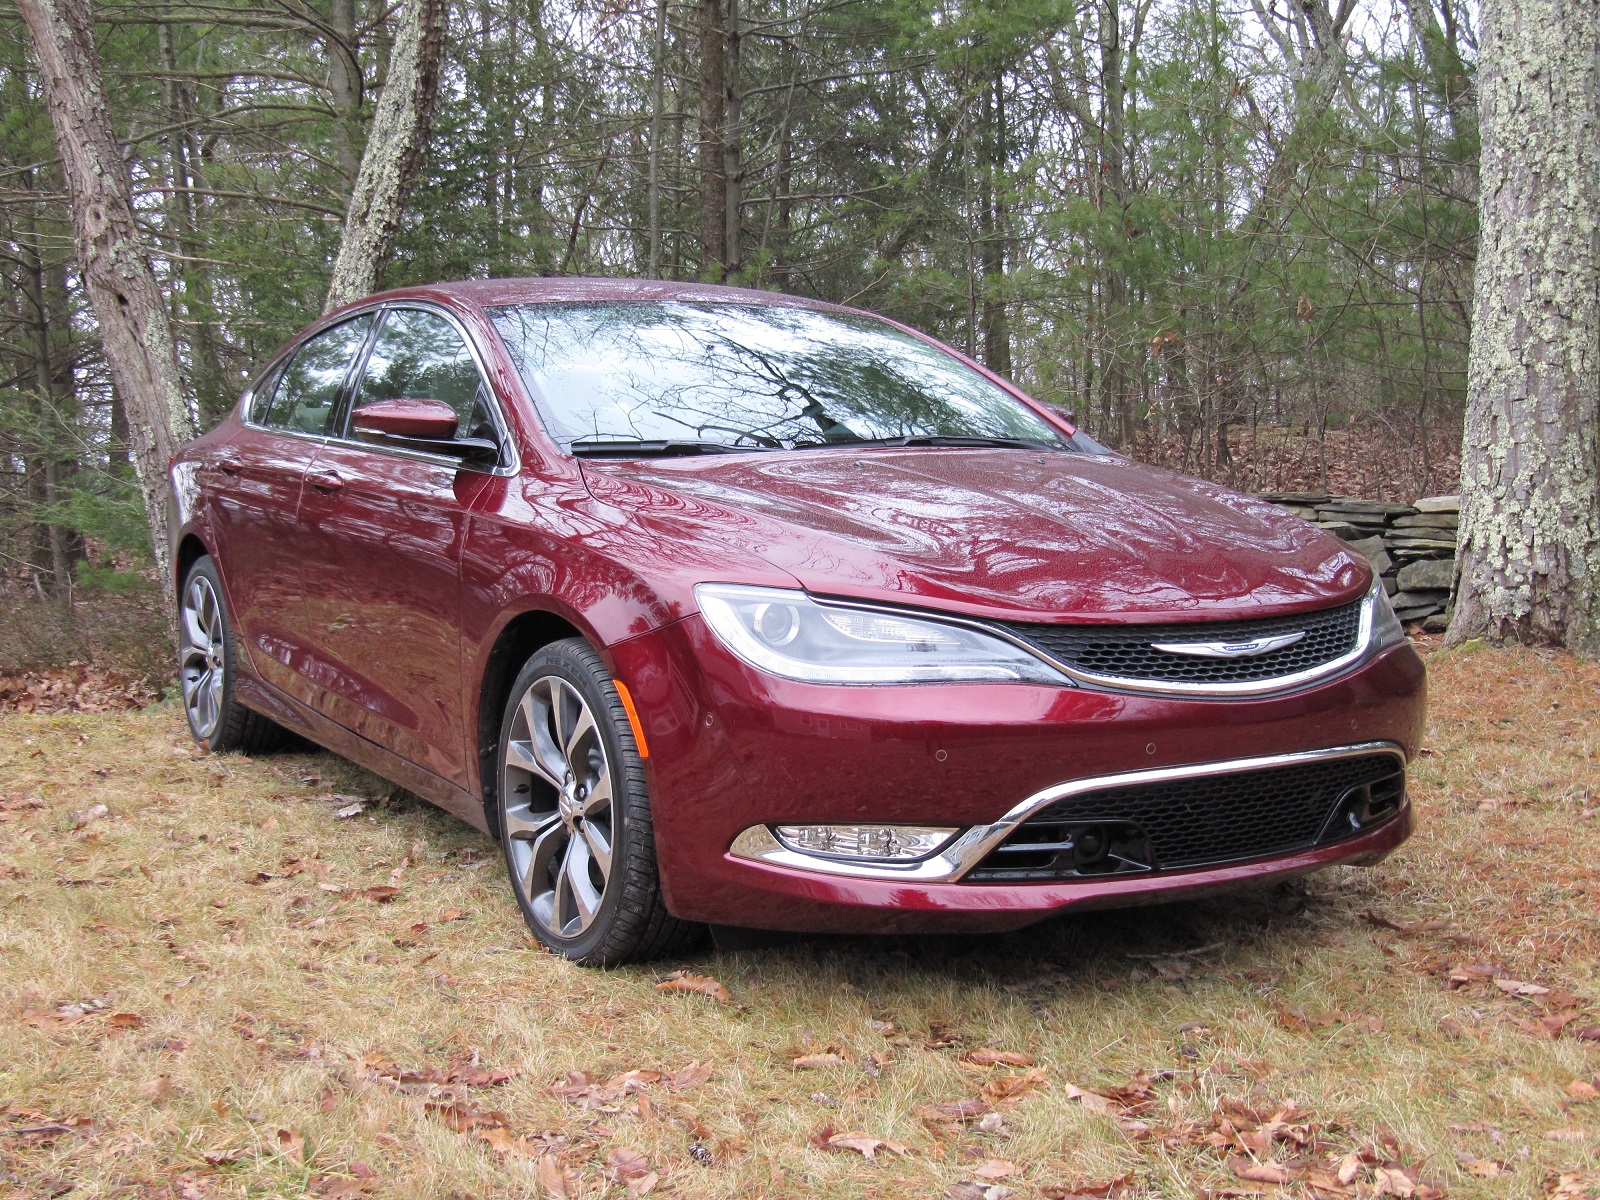 2015 Chrysler 200 Four-Cylinder: Gas Mileage Review